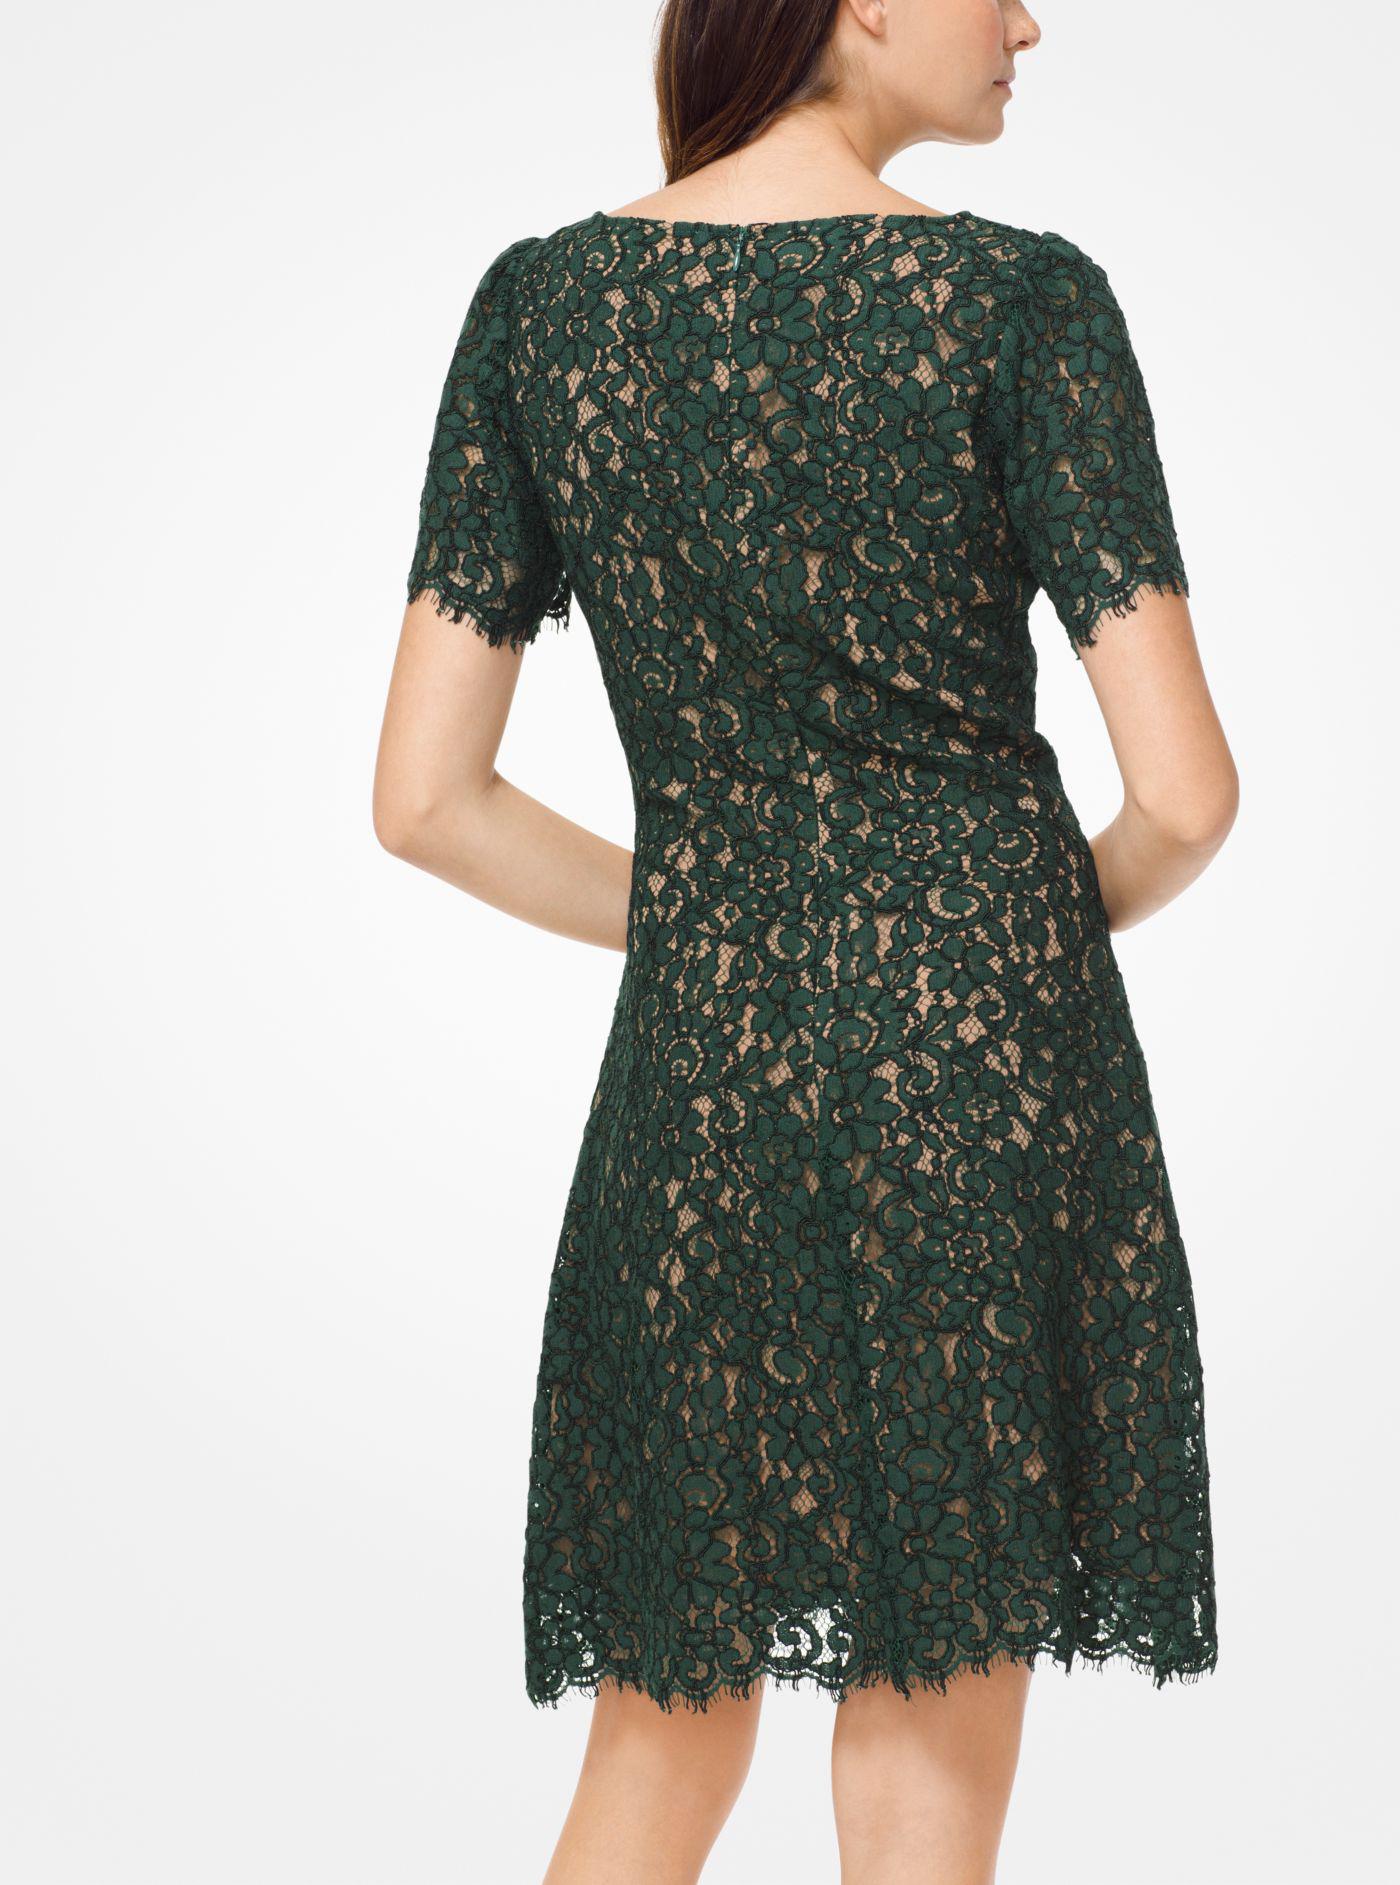 Michael Kors Corded Lace Dress in Green | Lyst